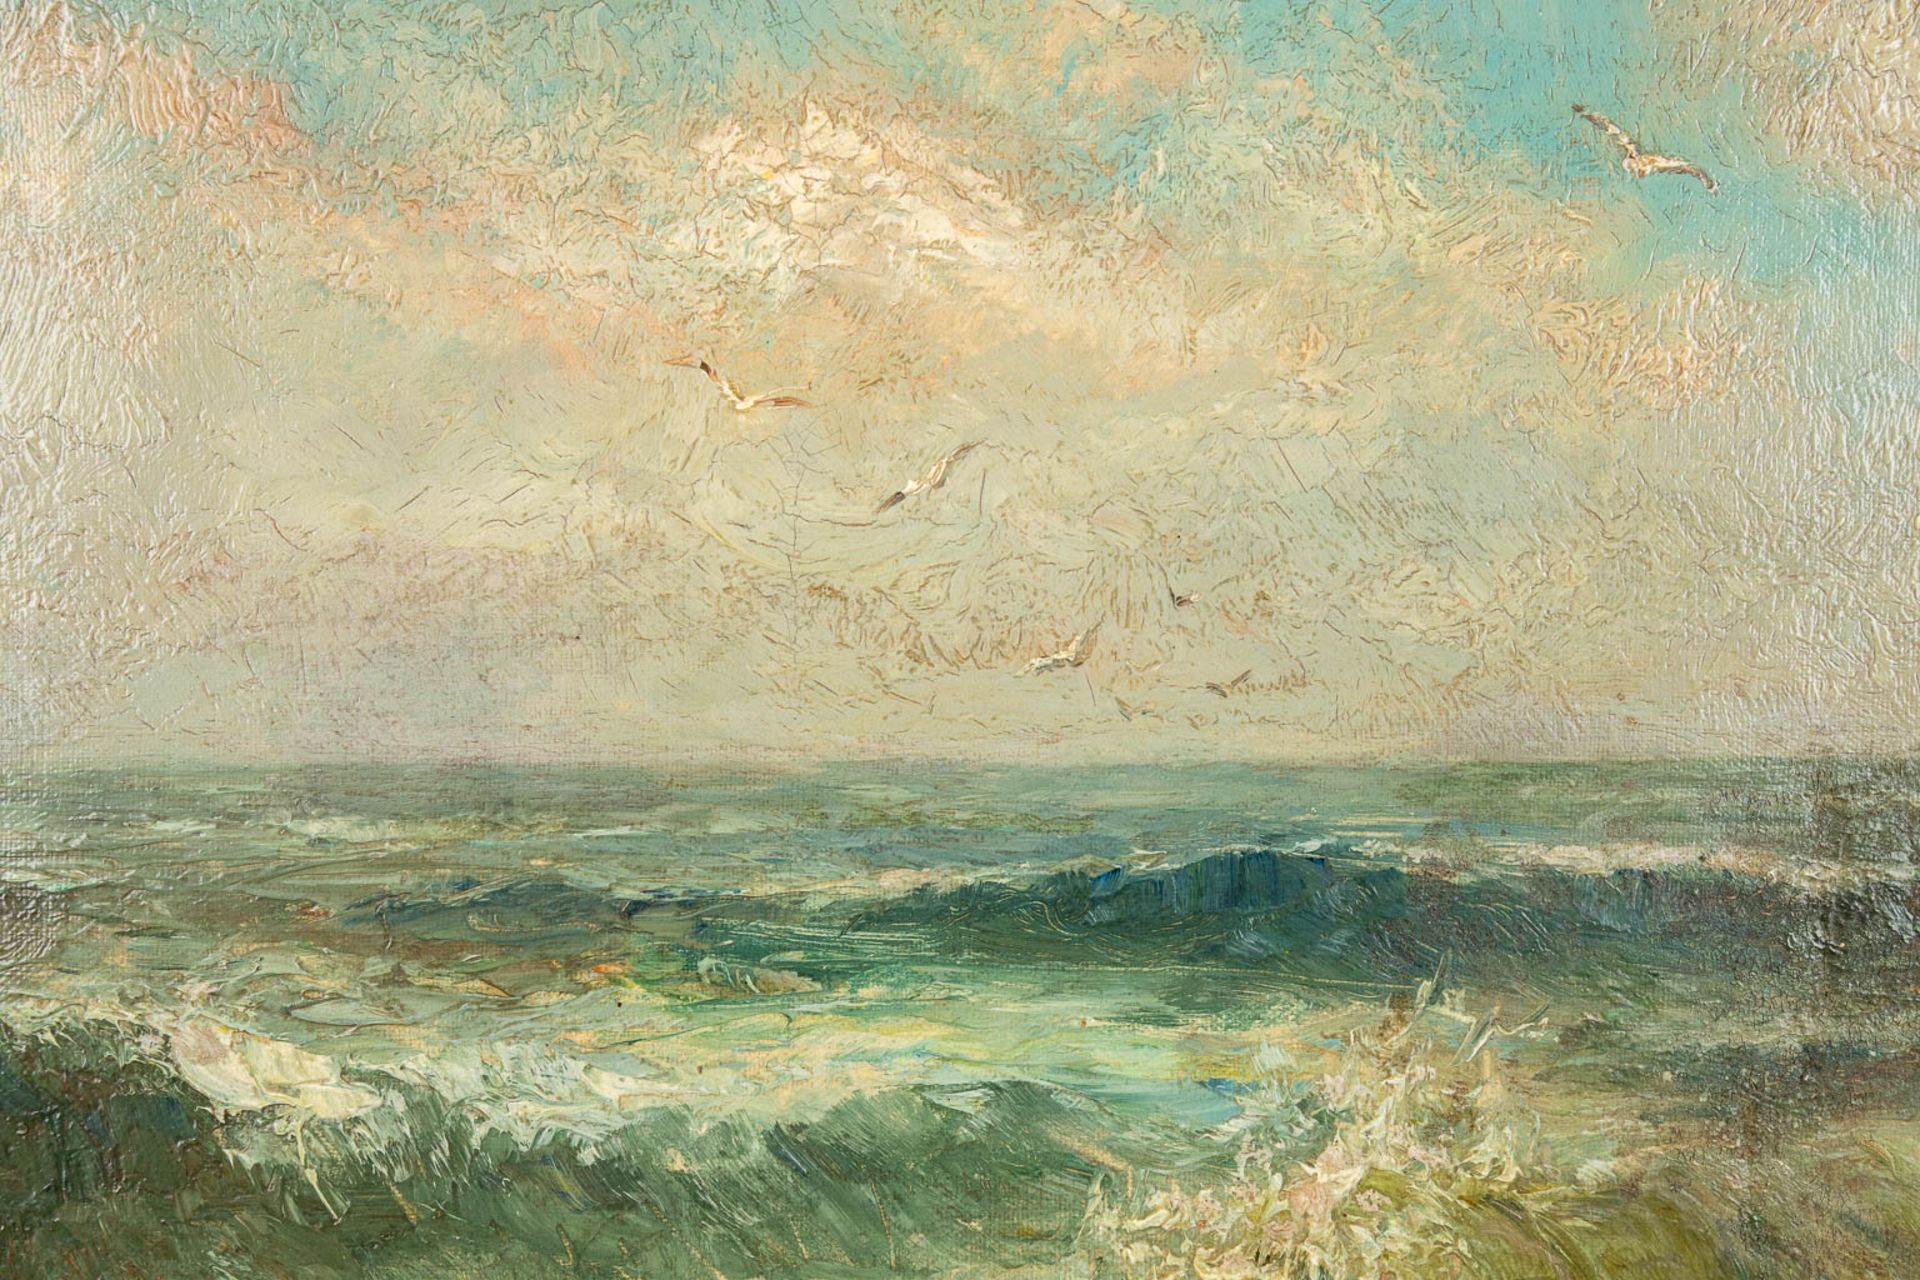 Romain STEPPE (1859-1927) 'View of the North Sea' oil on canvas. (W:69 x H:50 cm) - Image 4 of 7